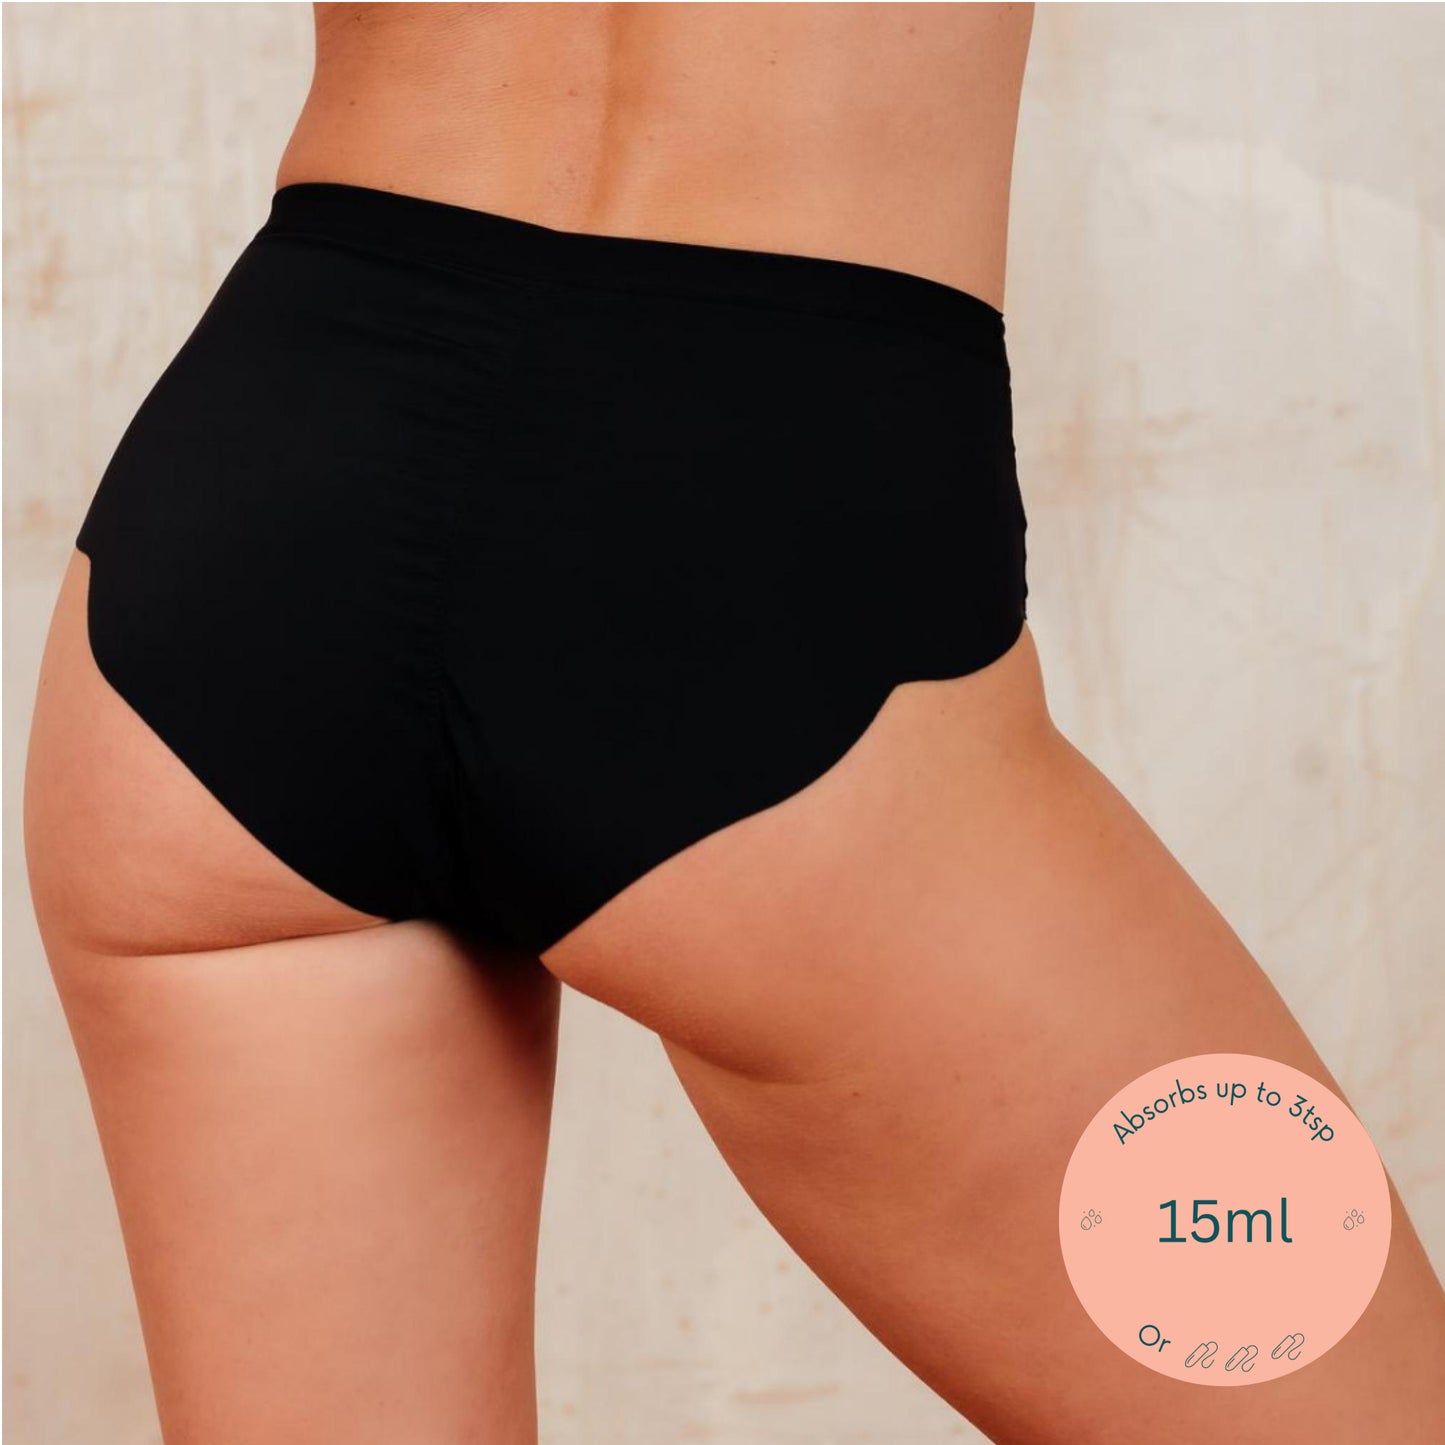 NIXI Body Incontinence and Period Underwear: Keeping You Leak